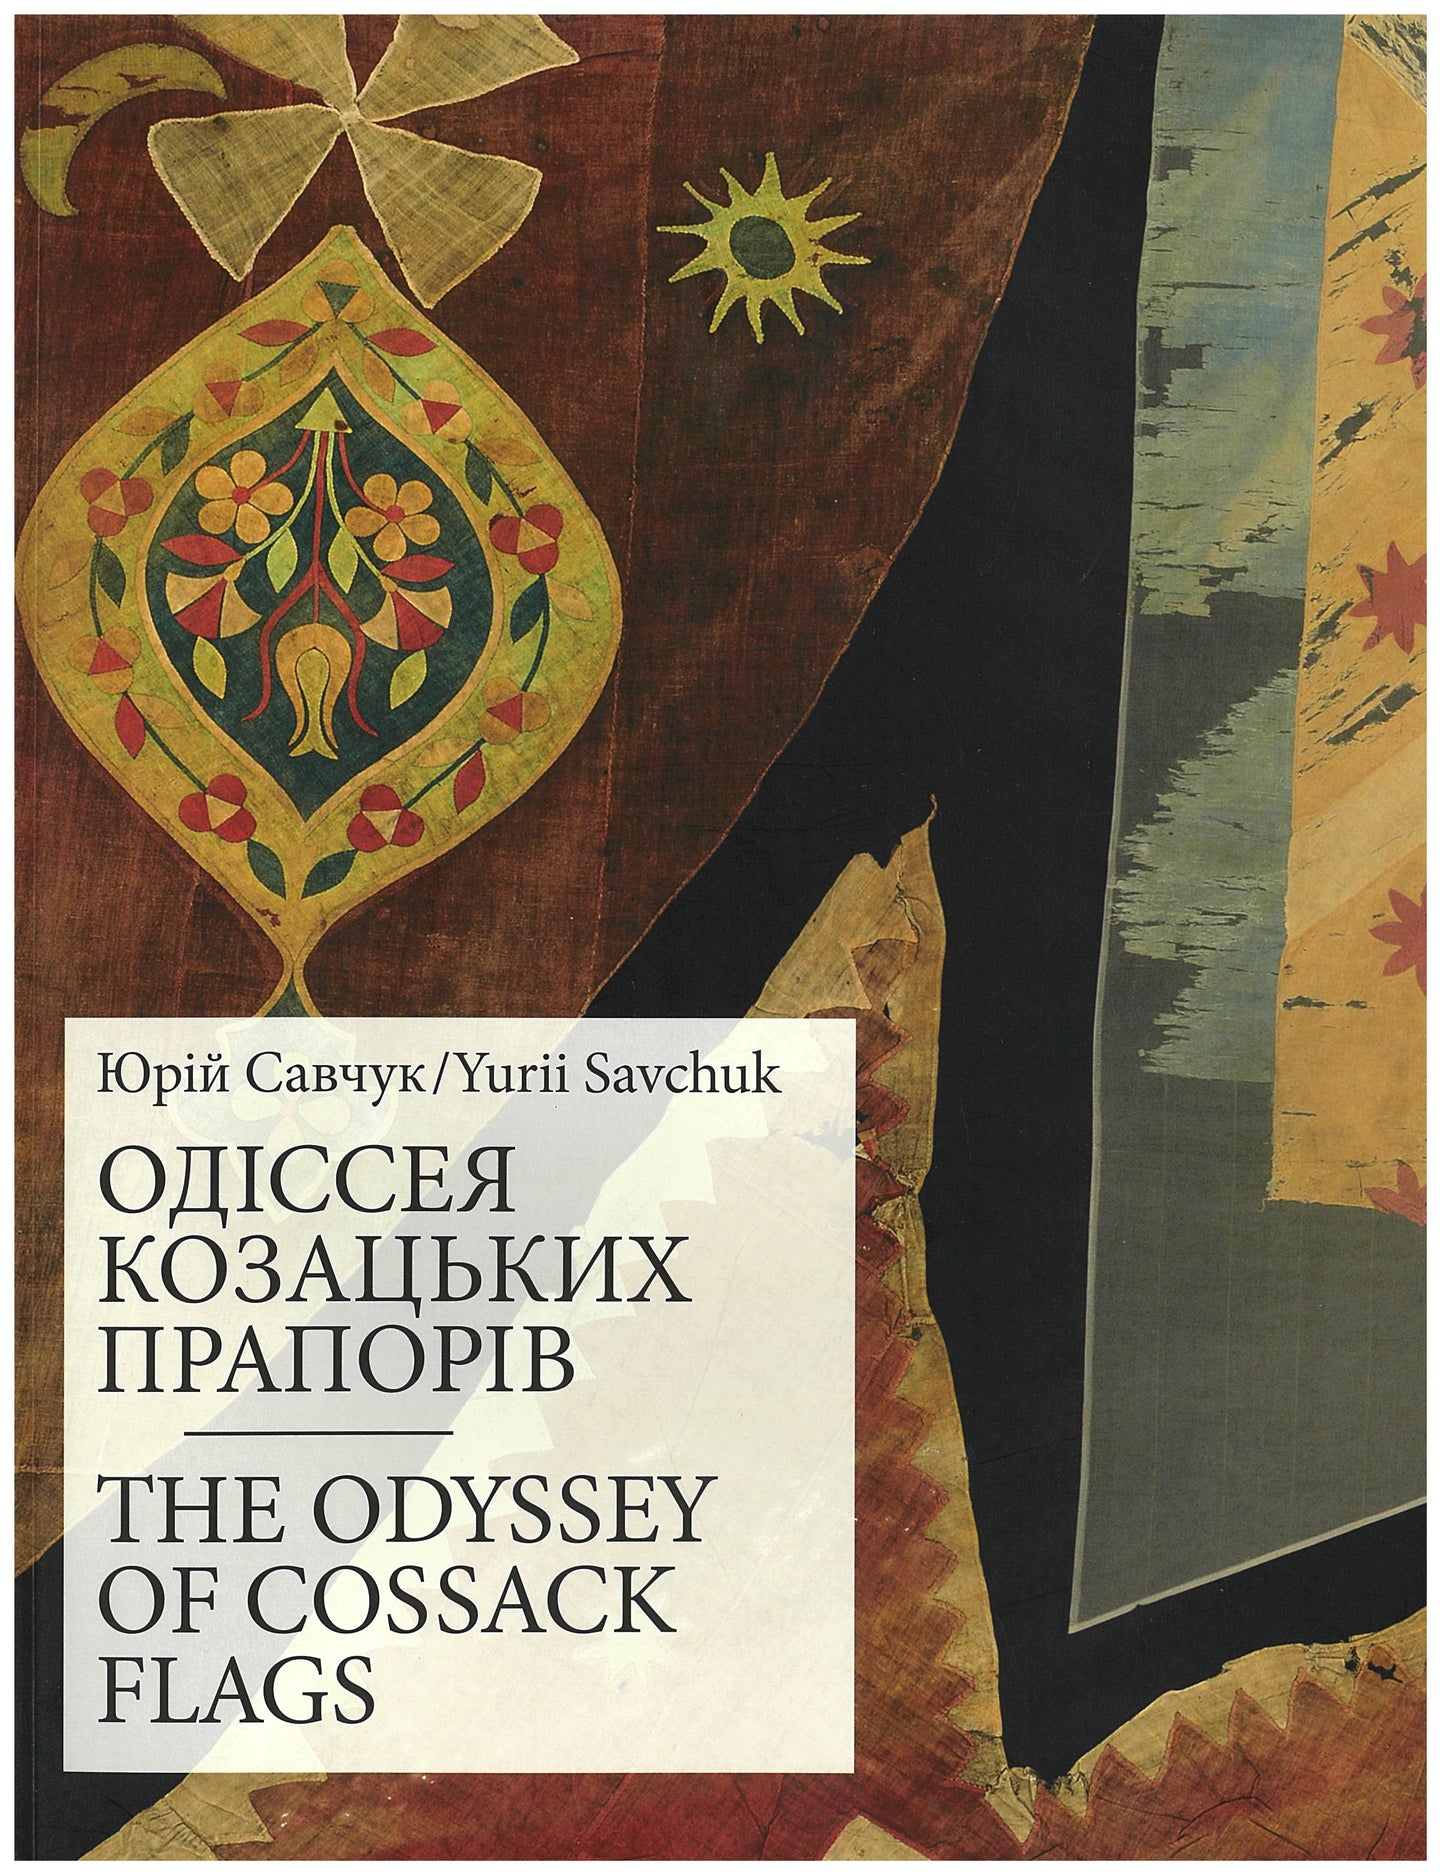 The Odyssey of Cossack Flags Book